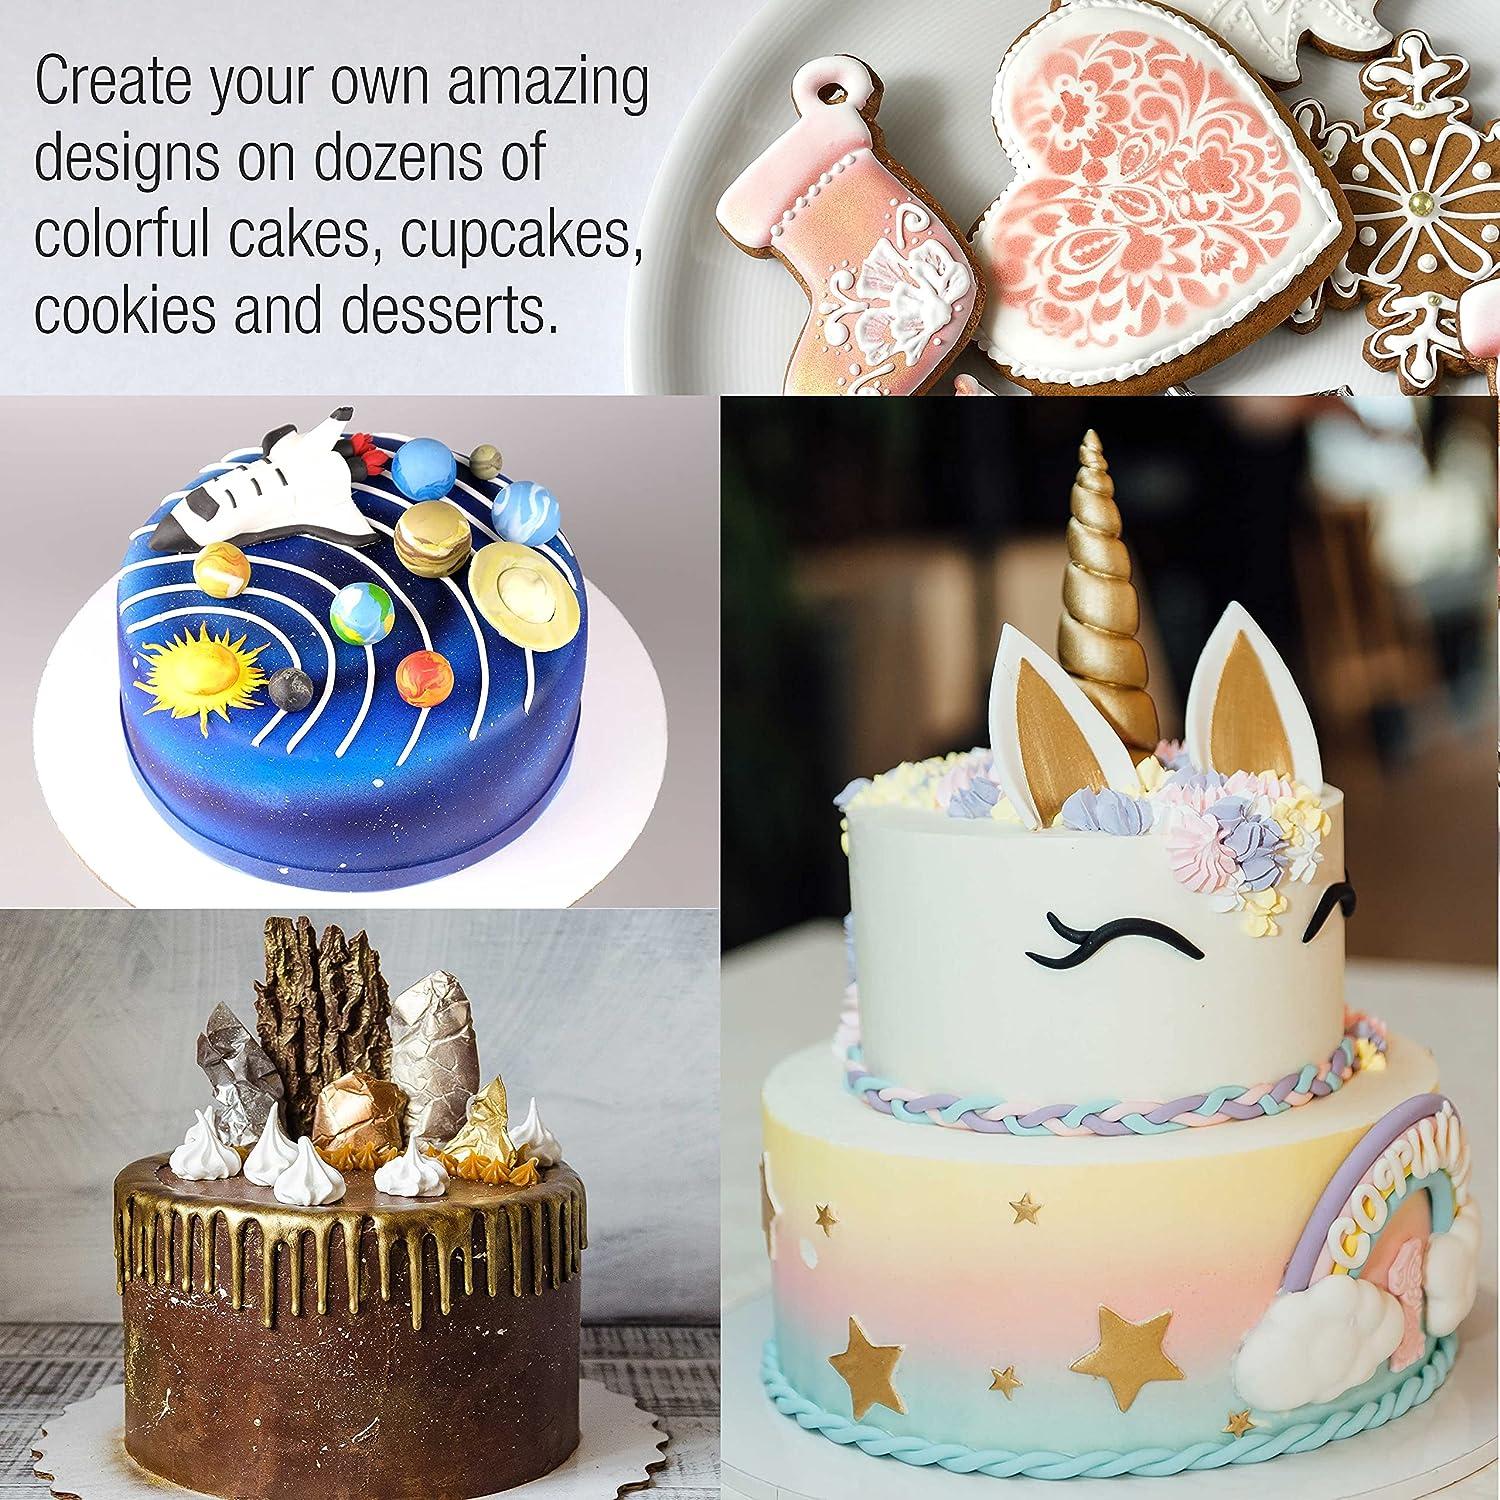 Supplier of all your baking and cake decorating products